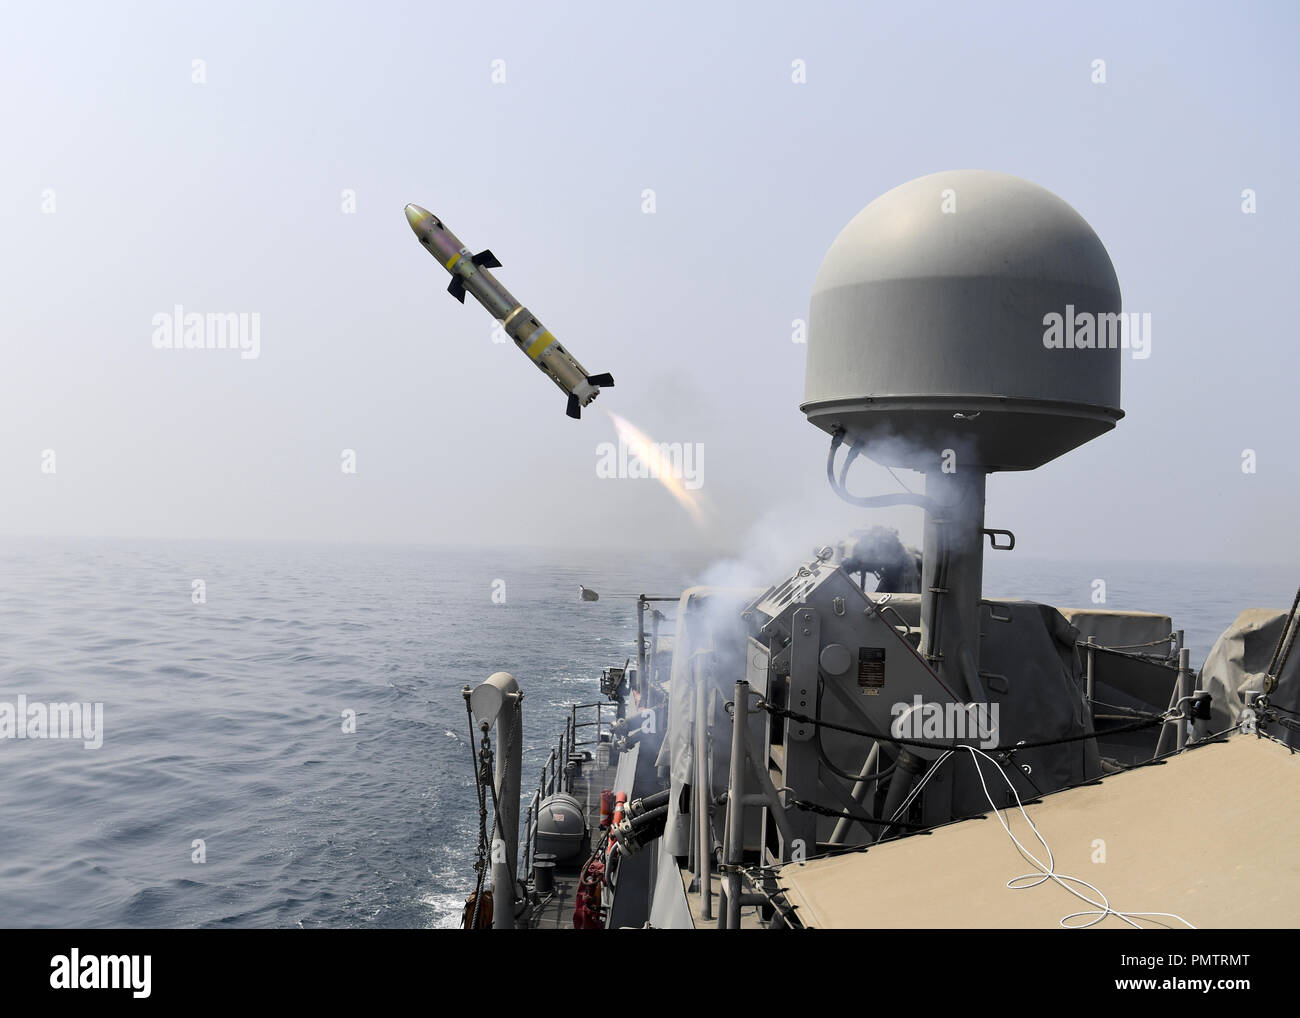 September 16, 2018 - ARABIAN GULF - ARABIAN GULF (Sept. 16, 2018) A MK-60 Griffin surface-to-surface missile is launched from the coastal patrol ship USS Thunderbolt (PC 12). Ships attached to U.S. 5th Fleet's Task Force 55 are conducting missile and naval gun exercises against high speed maneuvering targets to advance their ability to defend minesweepers and other coastal patrol ships. U.S. 5th Fleet and coalition assets are participating in numerous exercises as part of the greater Theater Counter Mine and Maritime Security Exercise to ensure maritime stability and security in the U.S. Centr Stock Photo